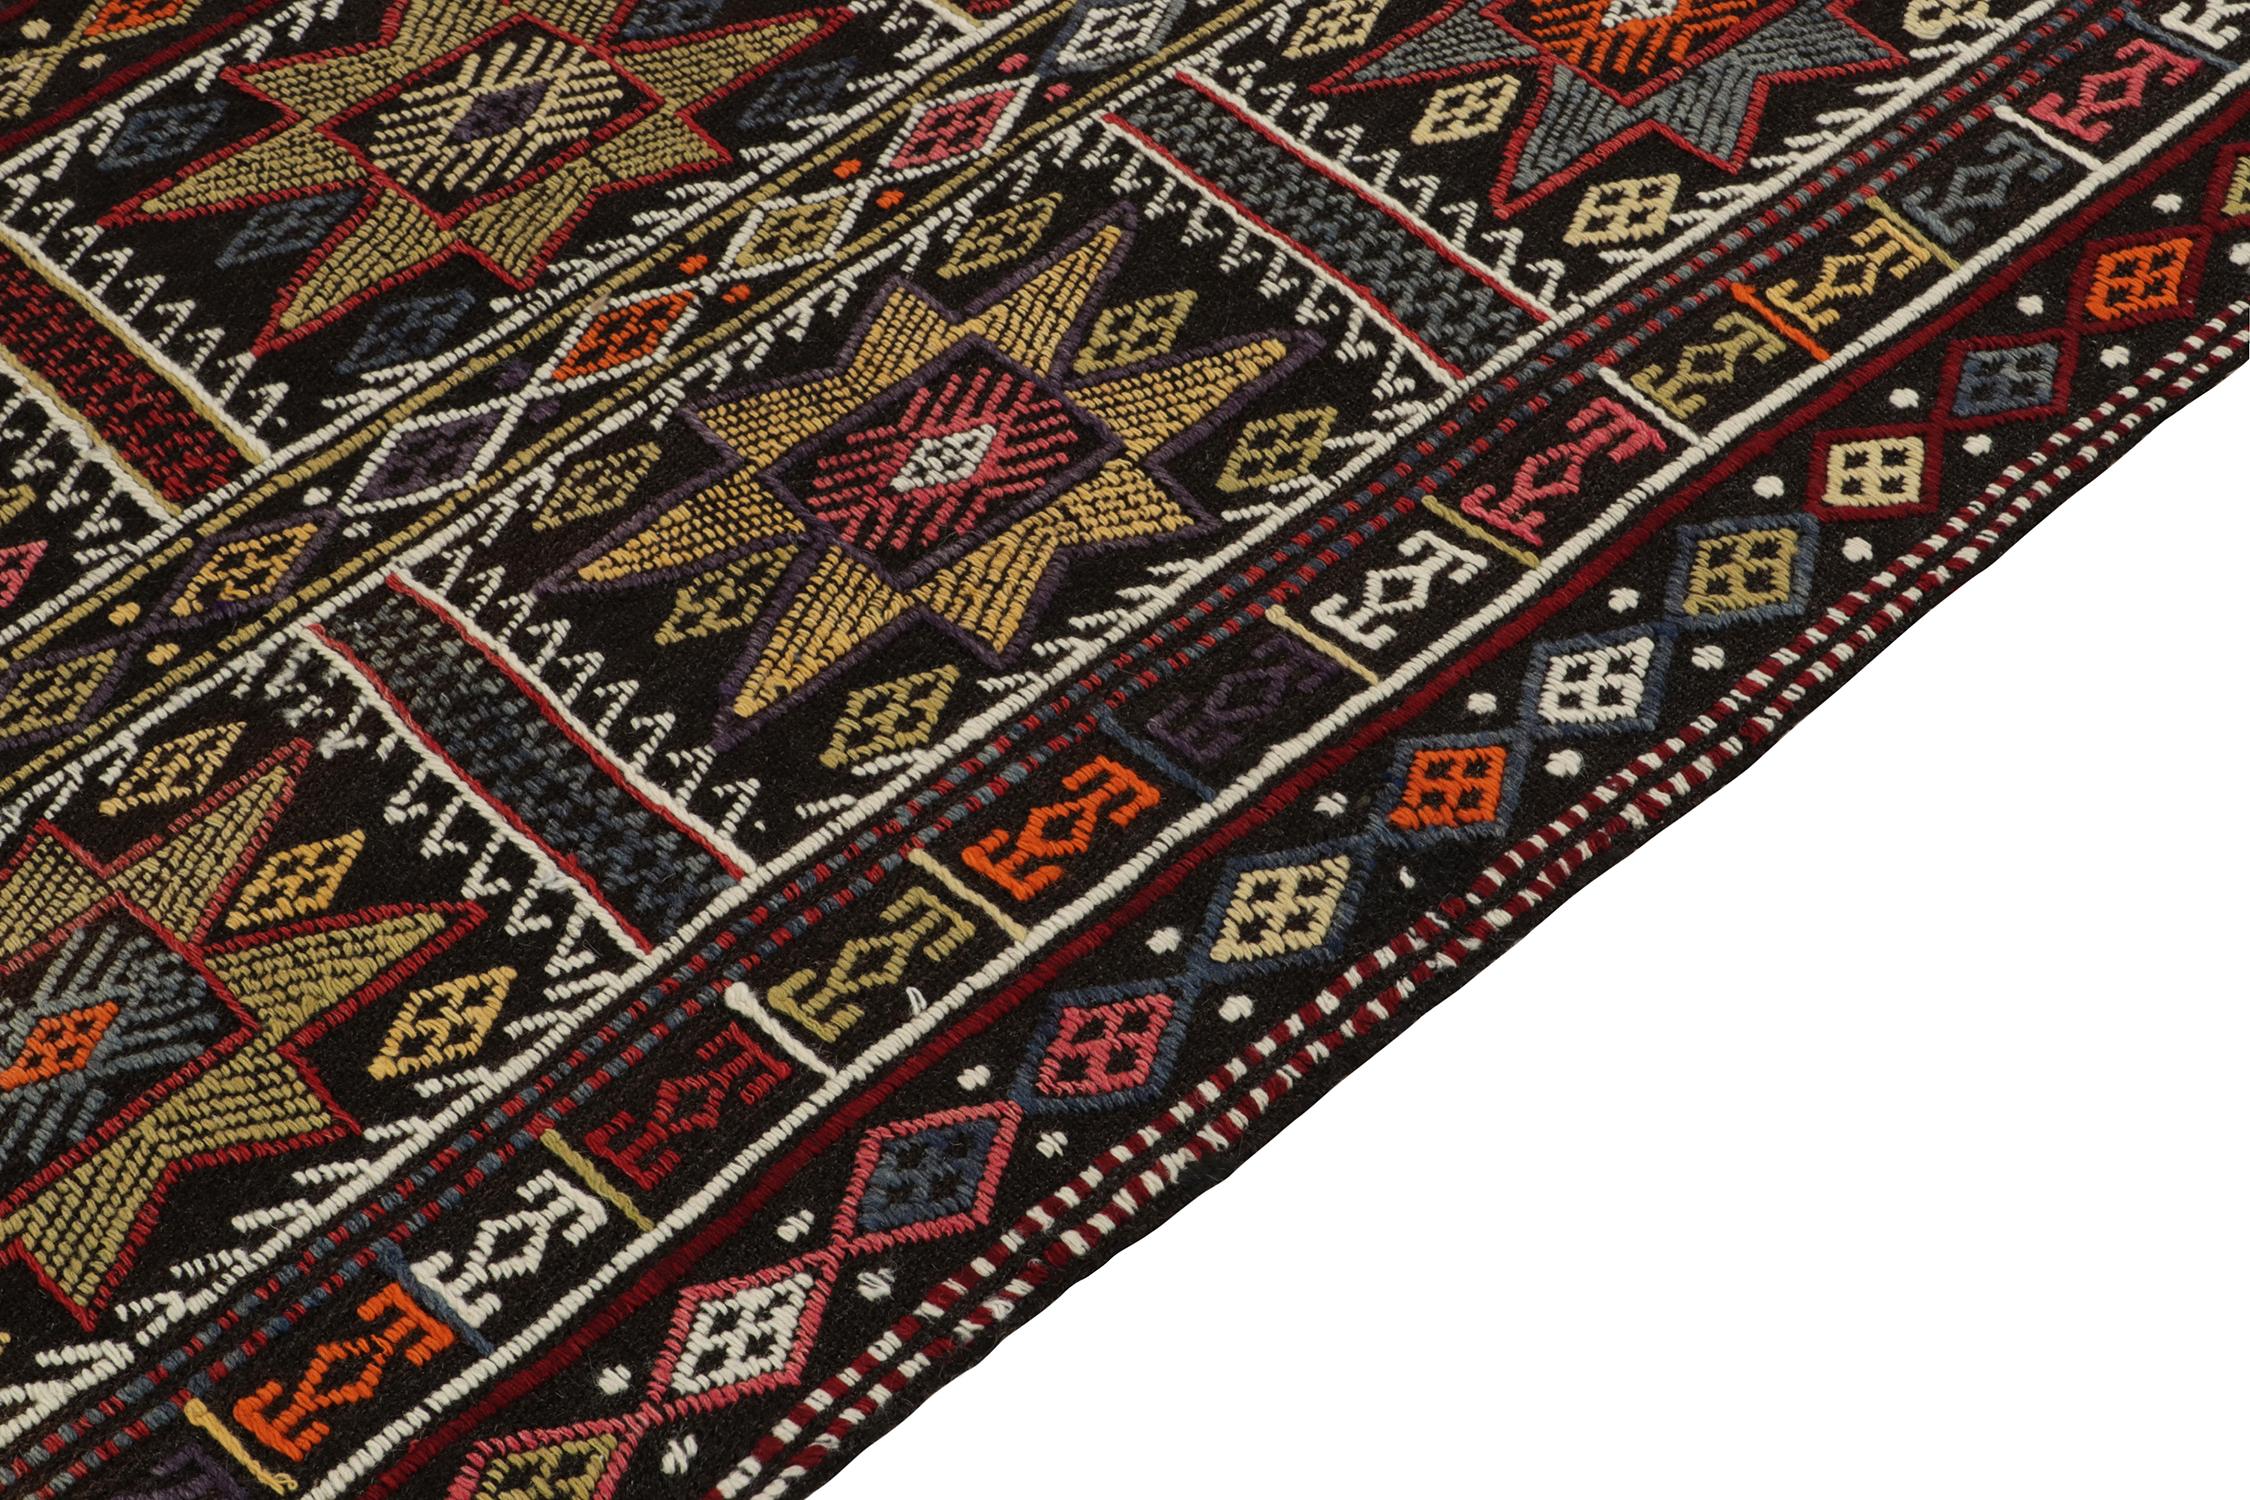 Hand-Knotted 1950s Vintage Kilim Tribal Rug in Black, Multicolor Geometric by Rug & Kilim For Sale